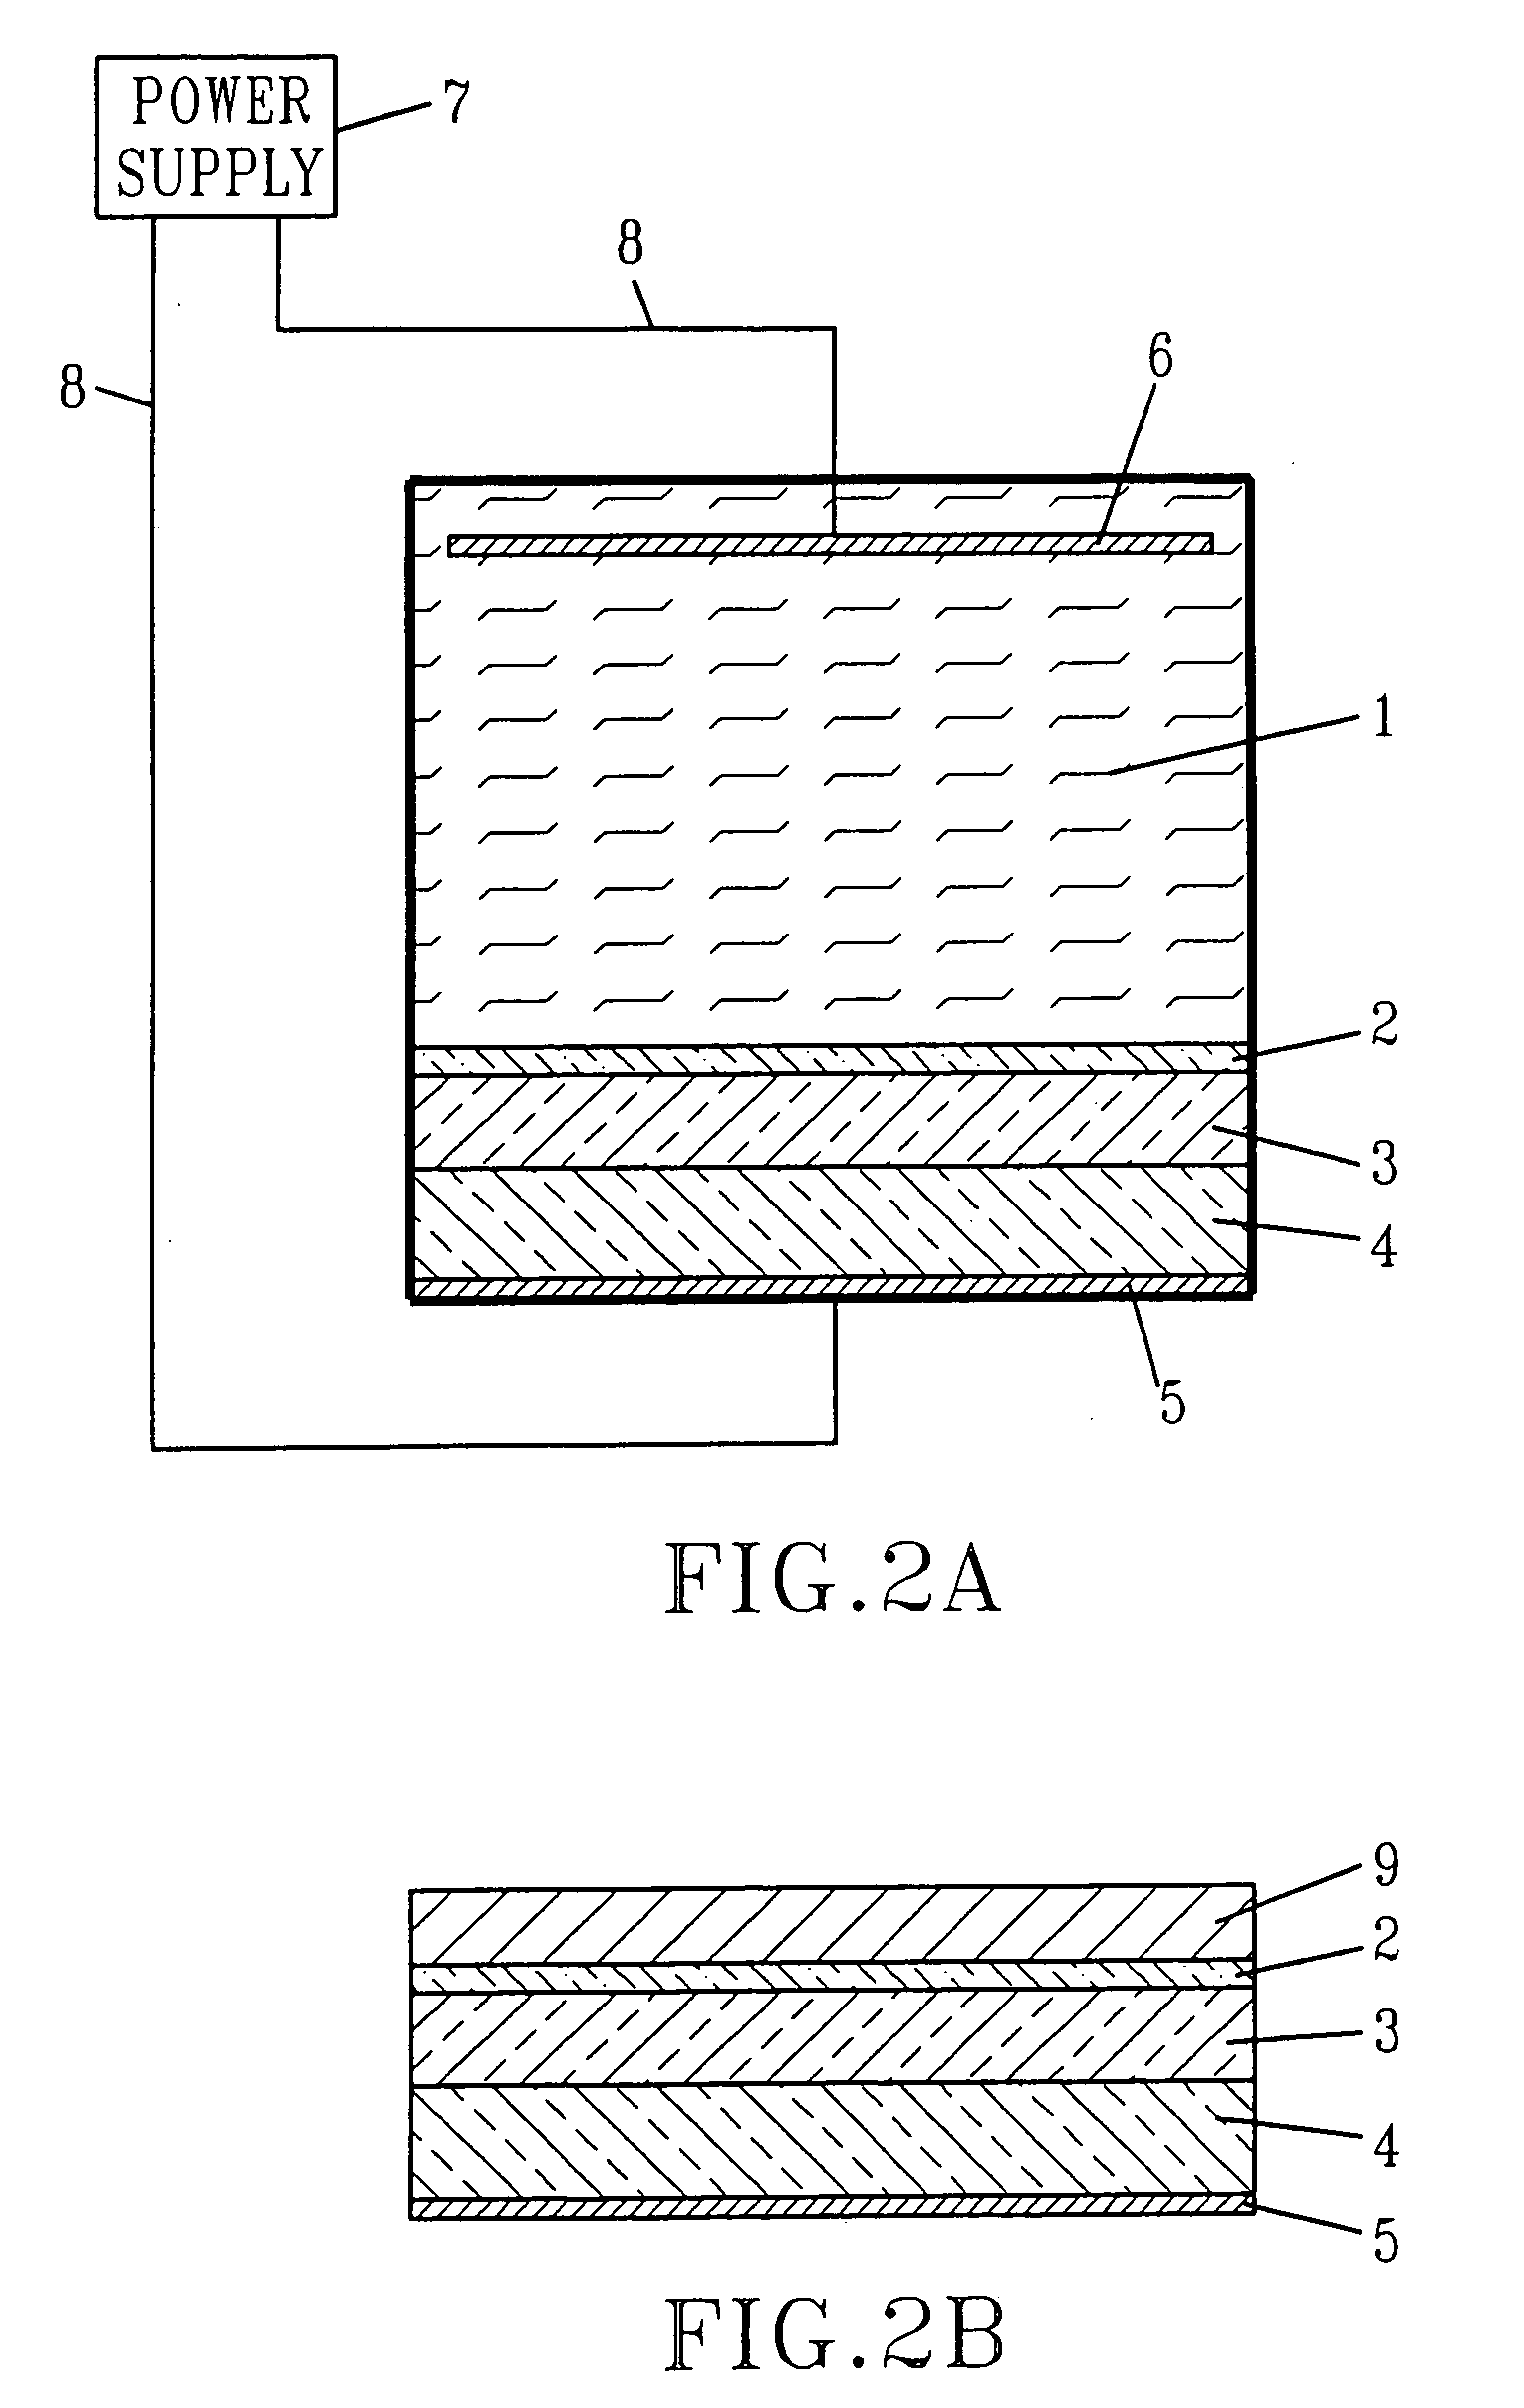 Gate stack engineering by electrochemical processing utilizing through-gate-dielectric current flow